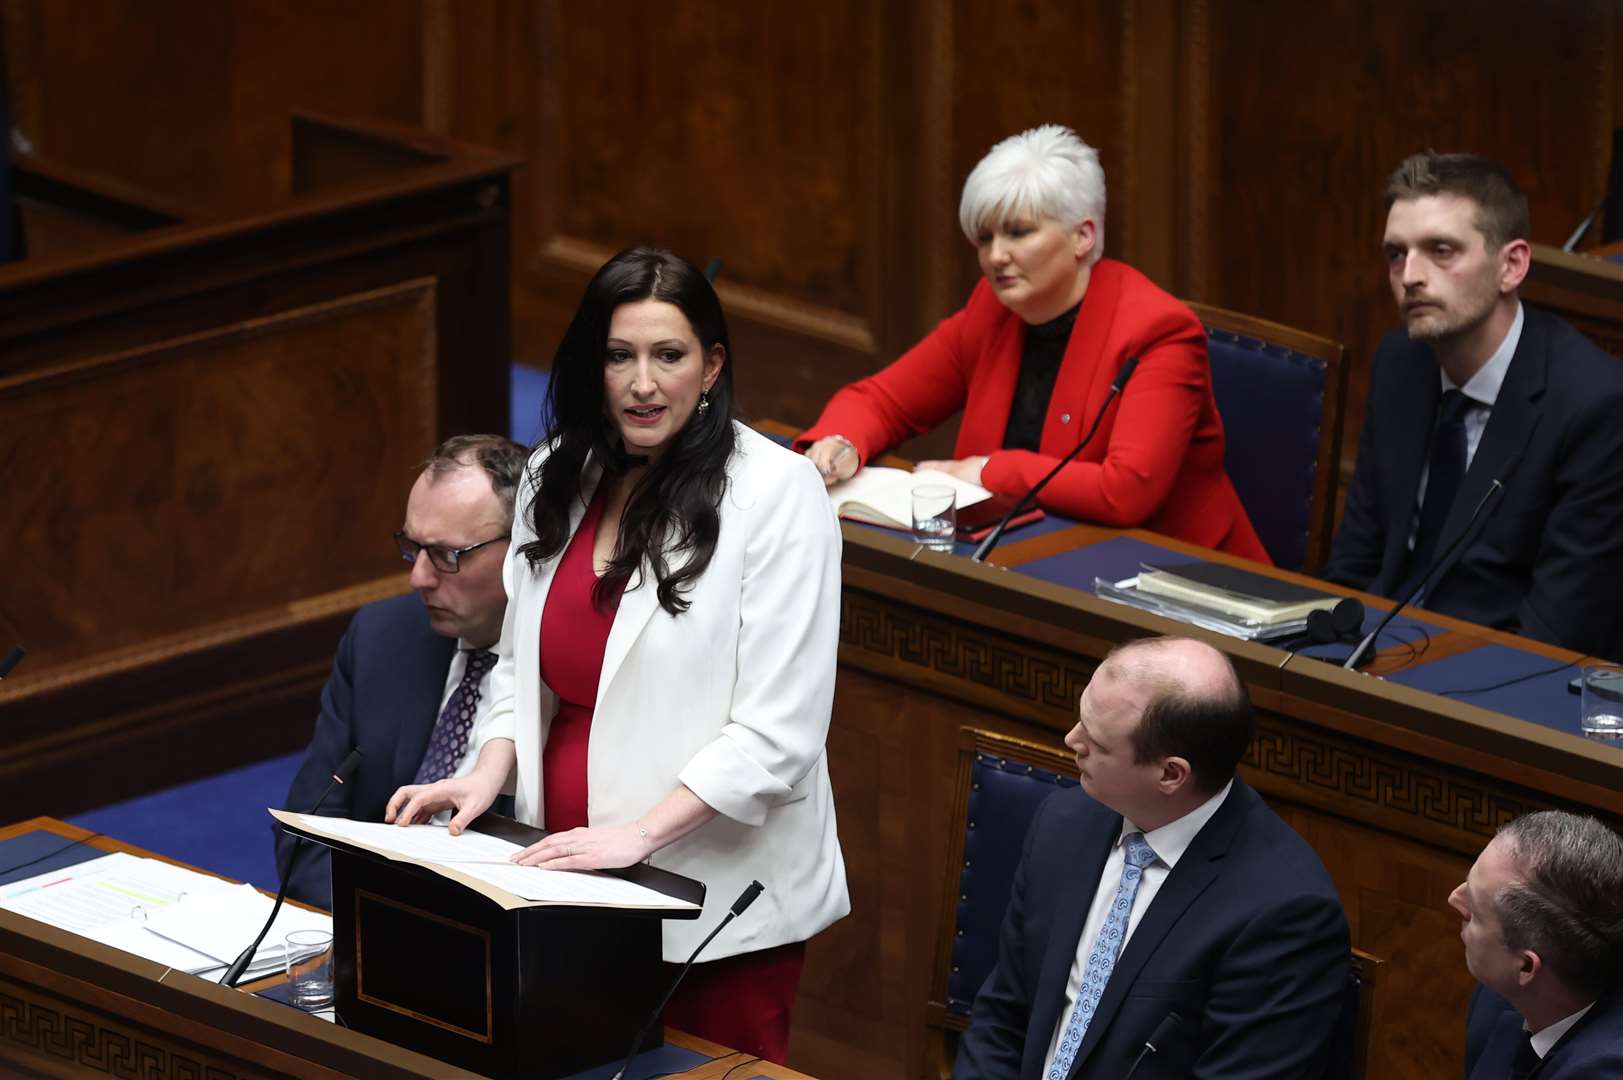 DUP MLA Emma Little-Pengelly speaking after she was nominated to serve as Northern Ireland’s next deputy First Minister (Liam McBurney/PA)